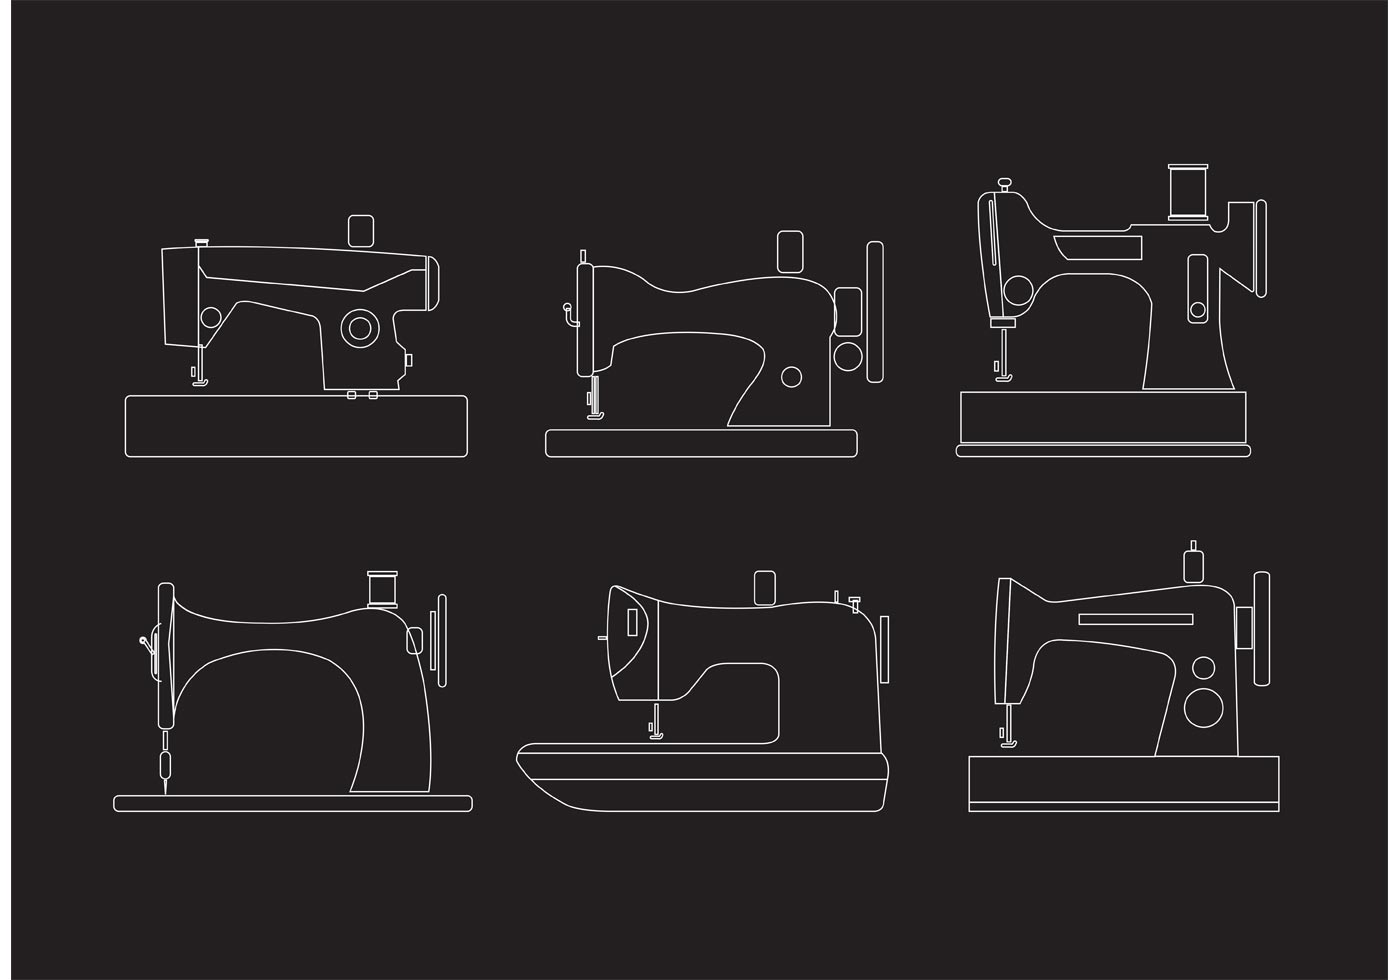 Download Outlined Vintage Sewing Machine Vectors - Download Free Vector Art, Stock Graphics & Images